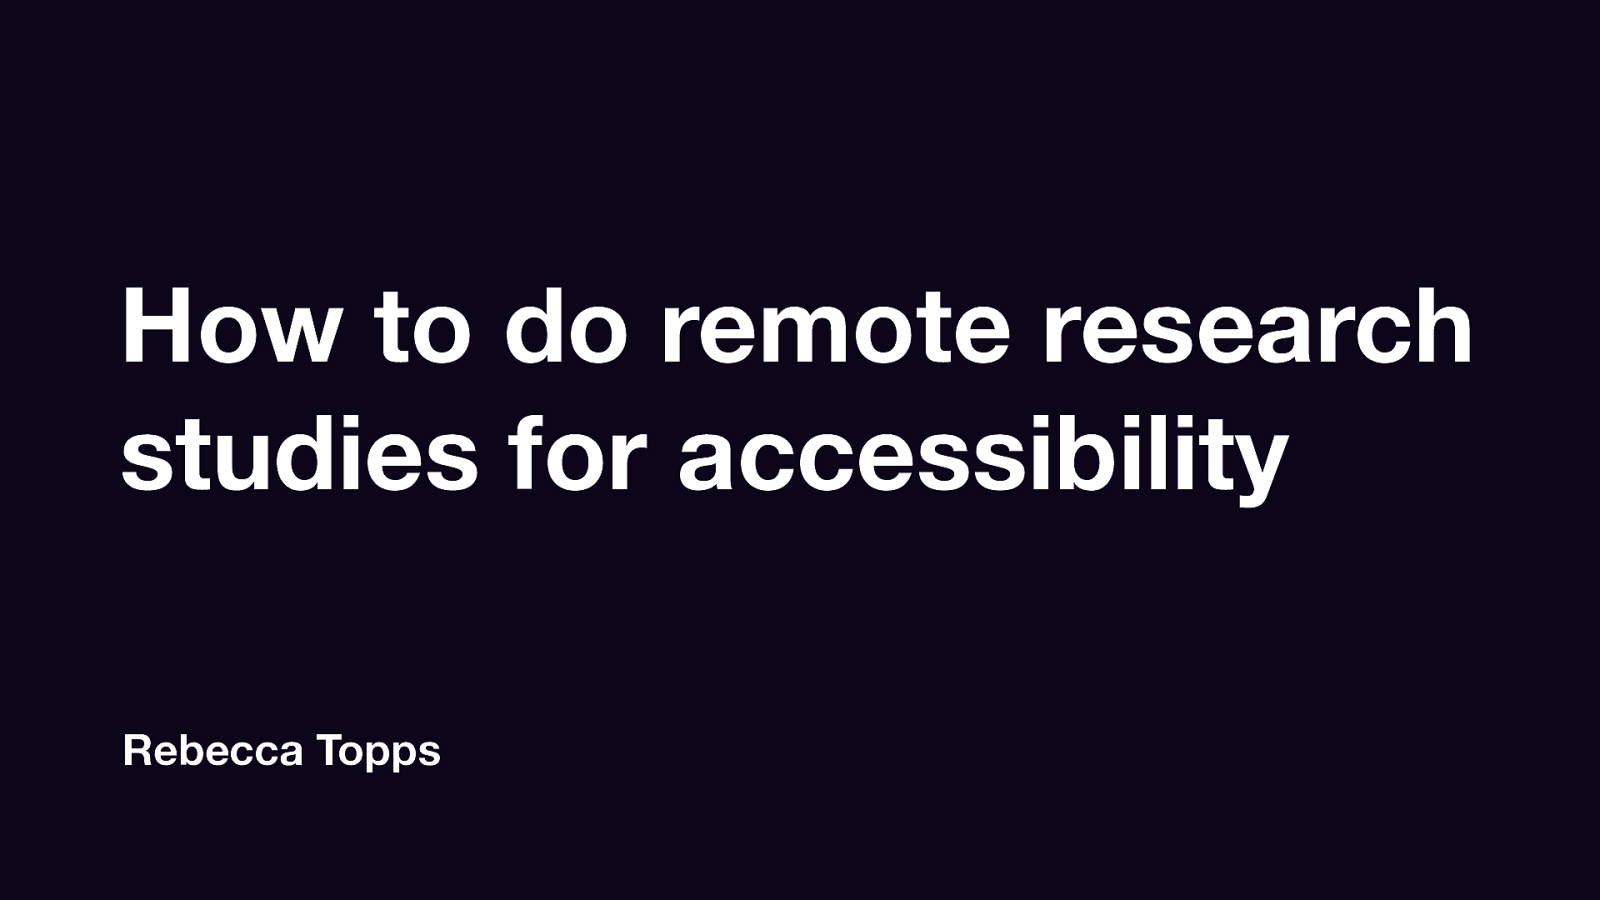 How To Do Remote Research Studies for Accessibility